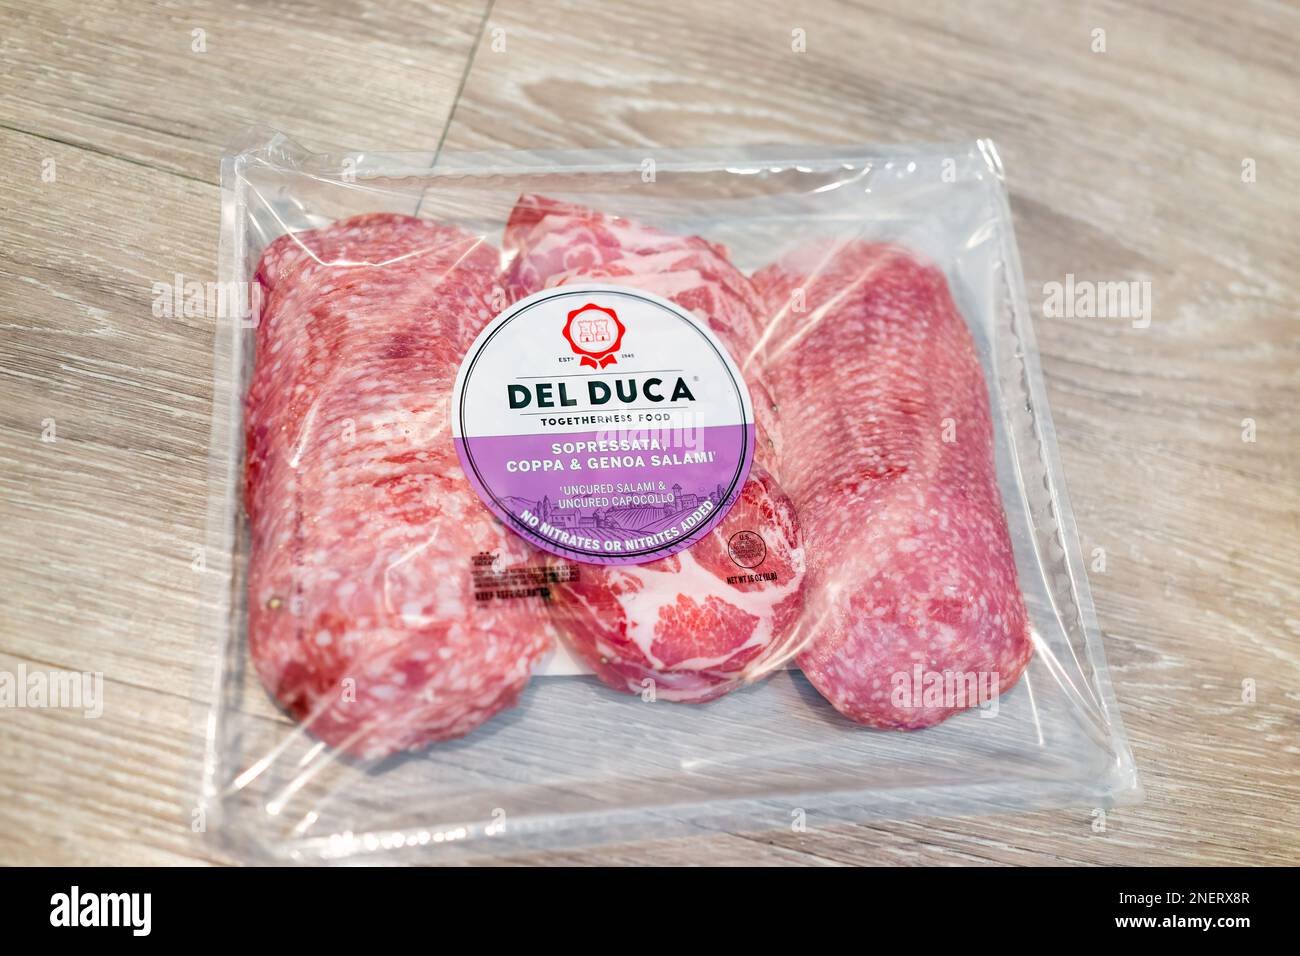 Naples, USA - May 17, 2022: Sign label for product for Del Duca cured salami slices with uncured sopressata, coppa and genoa salami with no nitrites Stock Photo